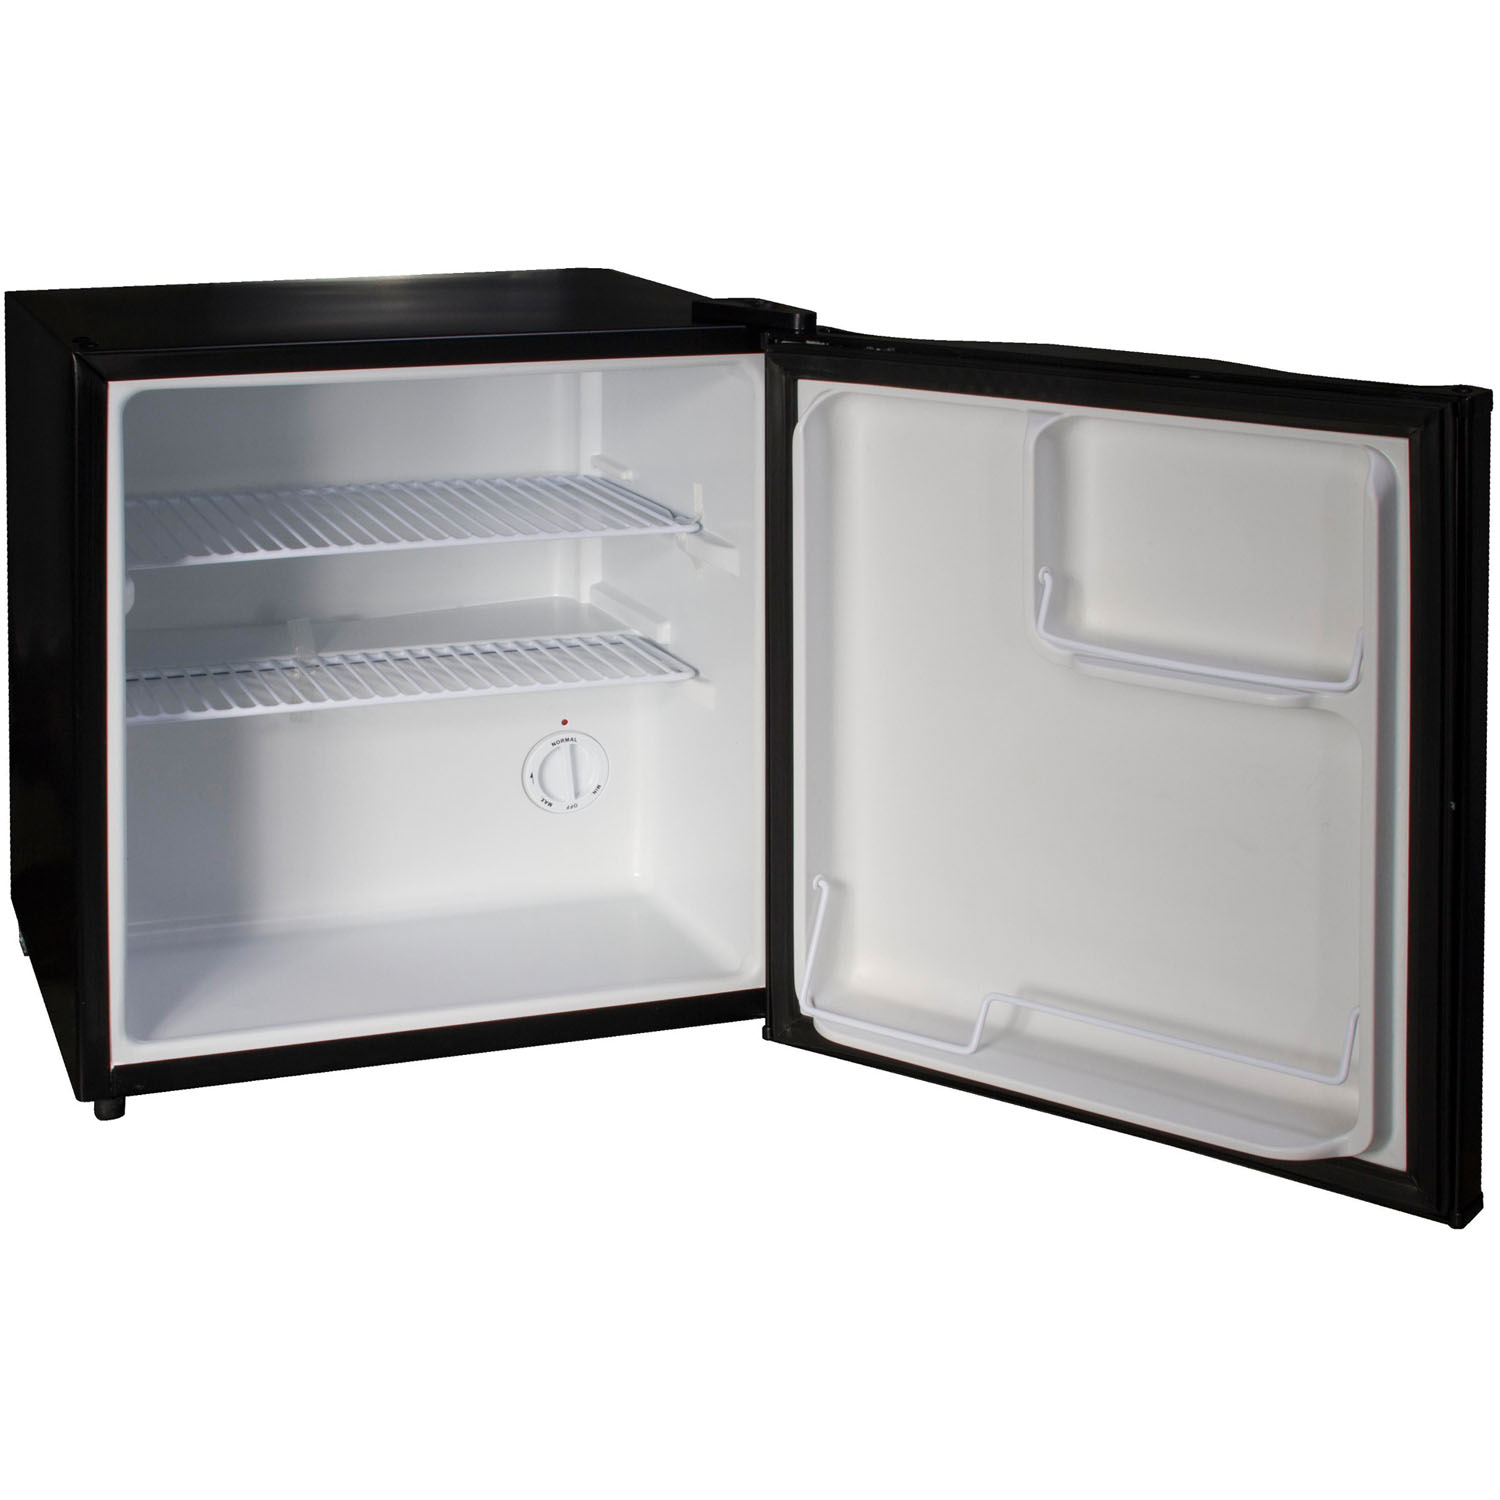 Compressor Cooling Capacity ft Wire Shelf and Recessed Handle in Black MCAR170BE 18 Mini Refrigerator with 1.7 cu